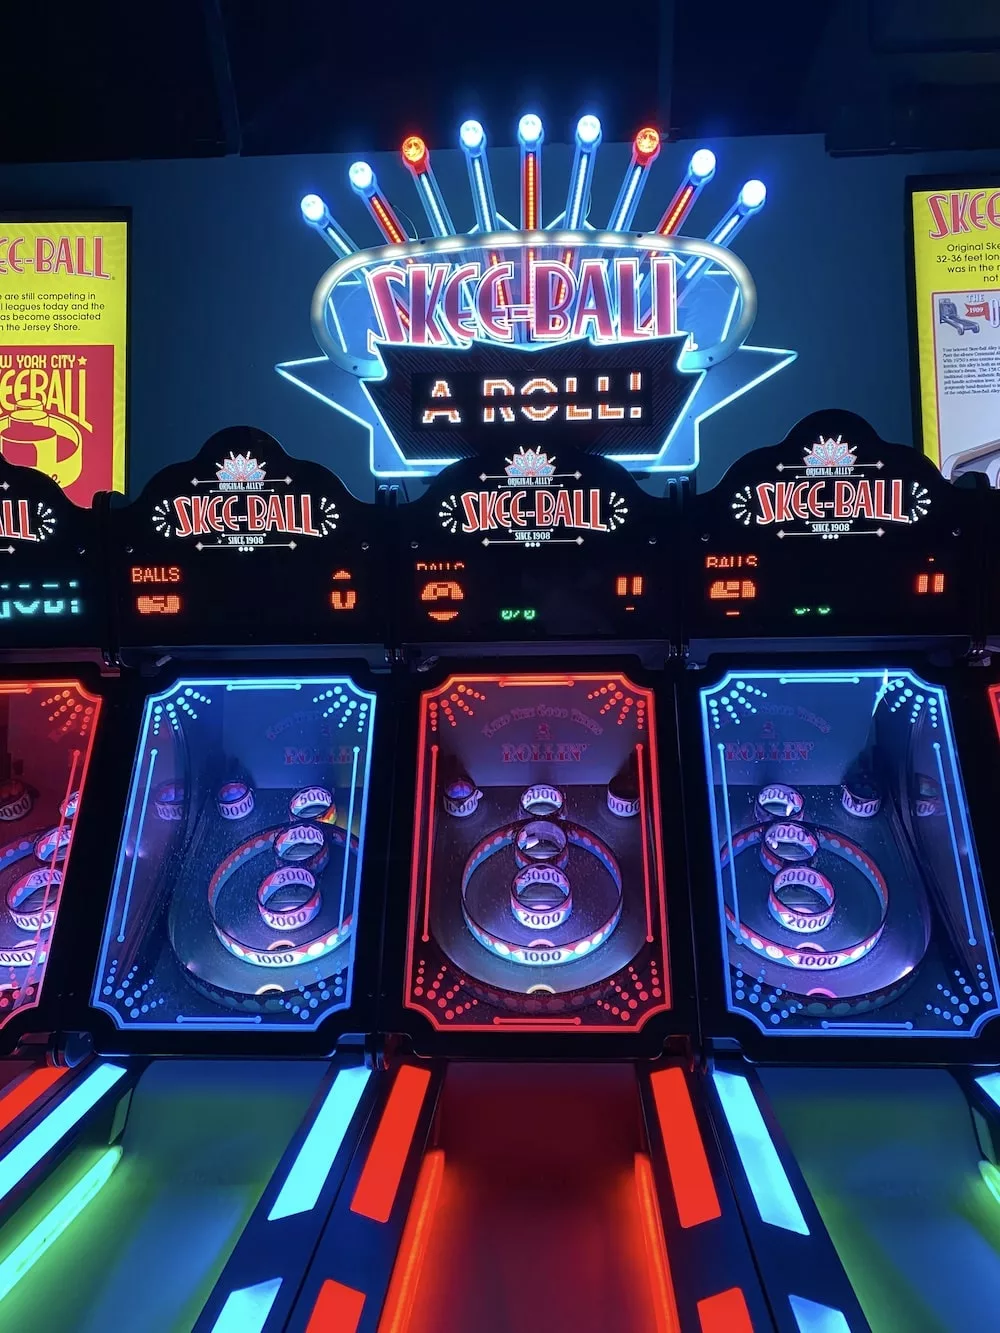 Skeeball games at Beyond the Lens! Techno-Tainment in Branson, Missouri